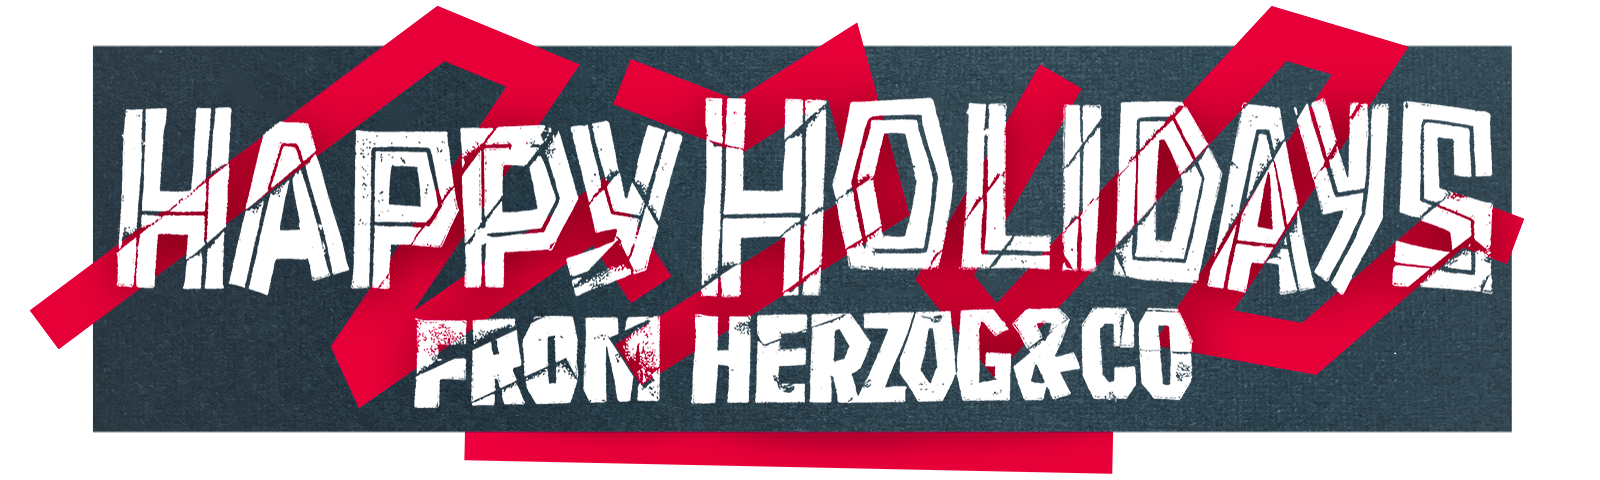 Happy Holidays from Herzog and Co.